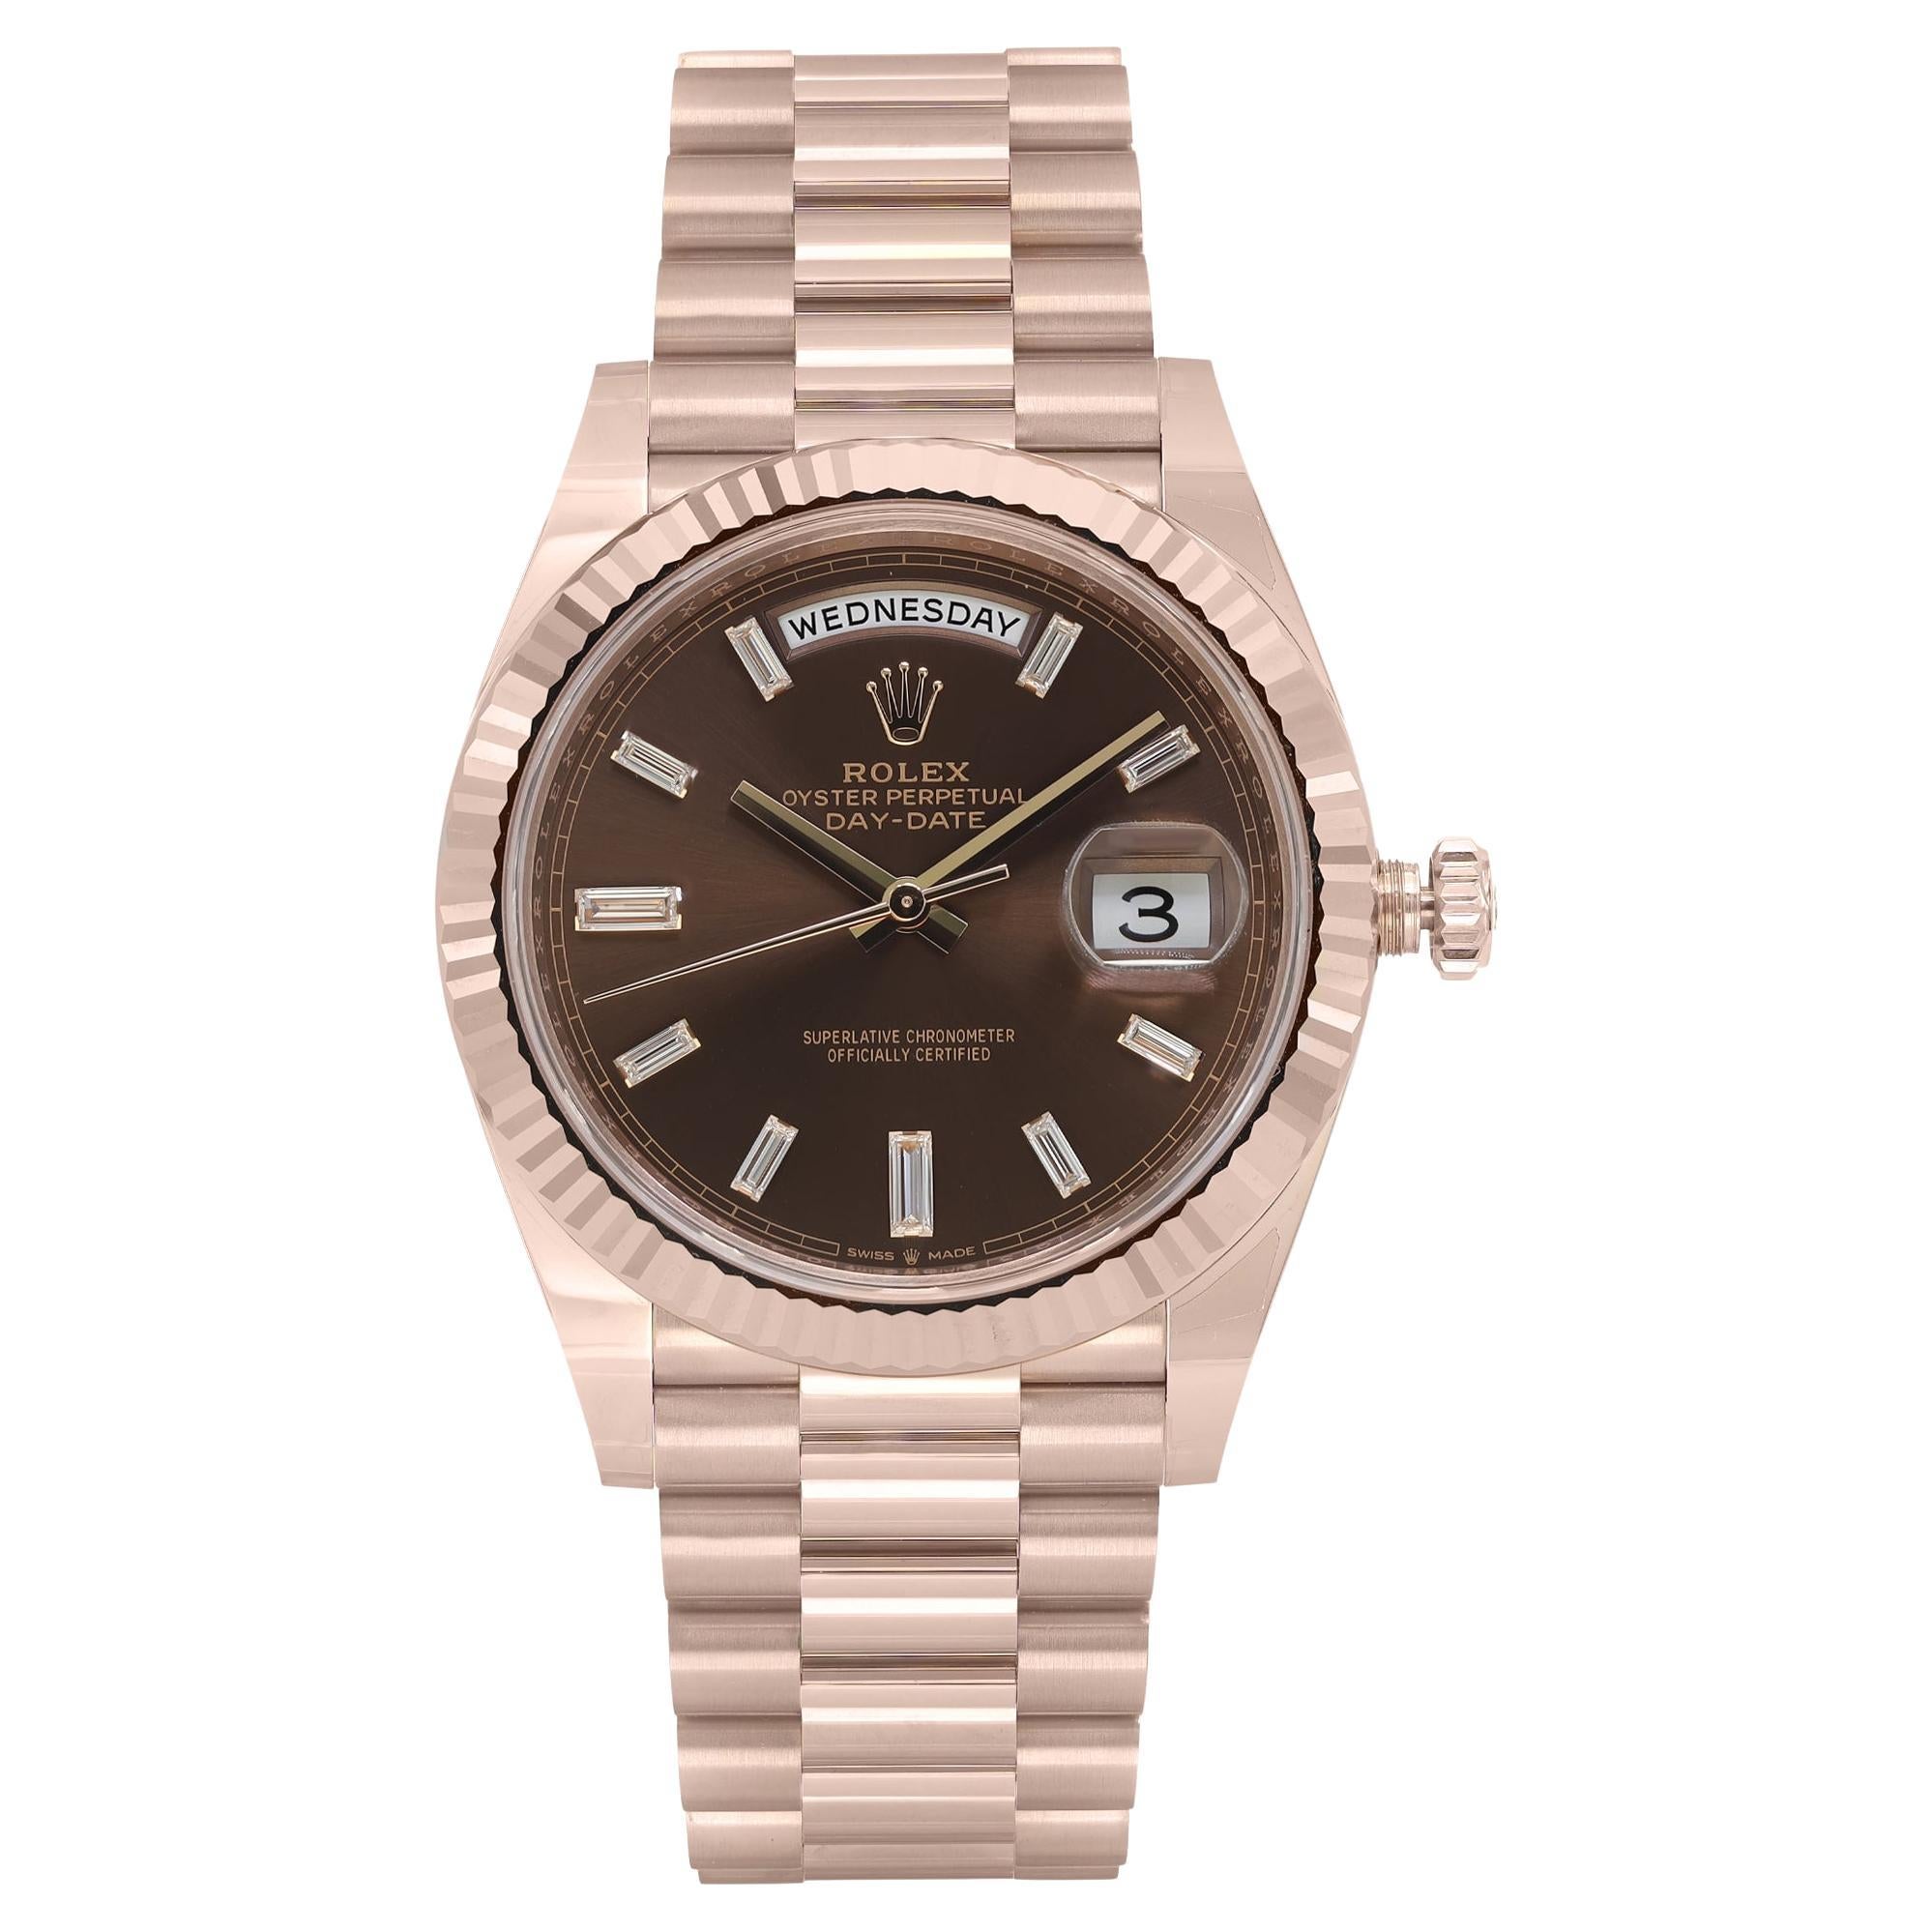 Rolex Day Date 18K Rose Gold Diamond Baguette Chocolate Dial Watch 228235 For Sale